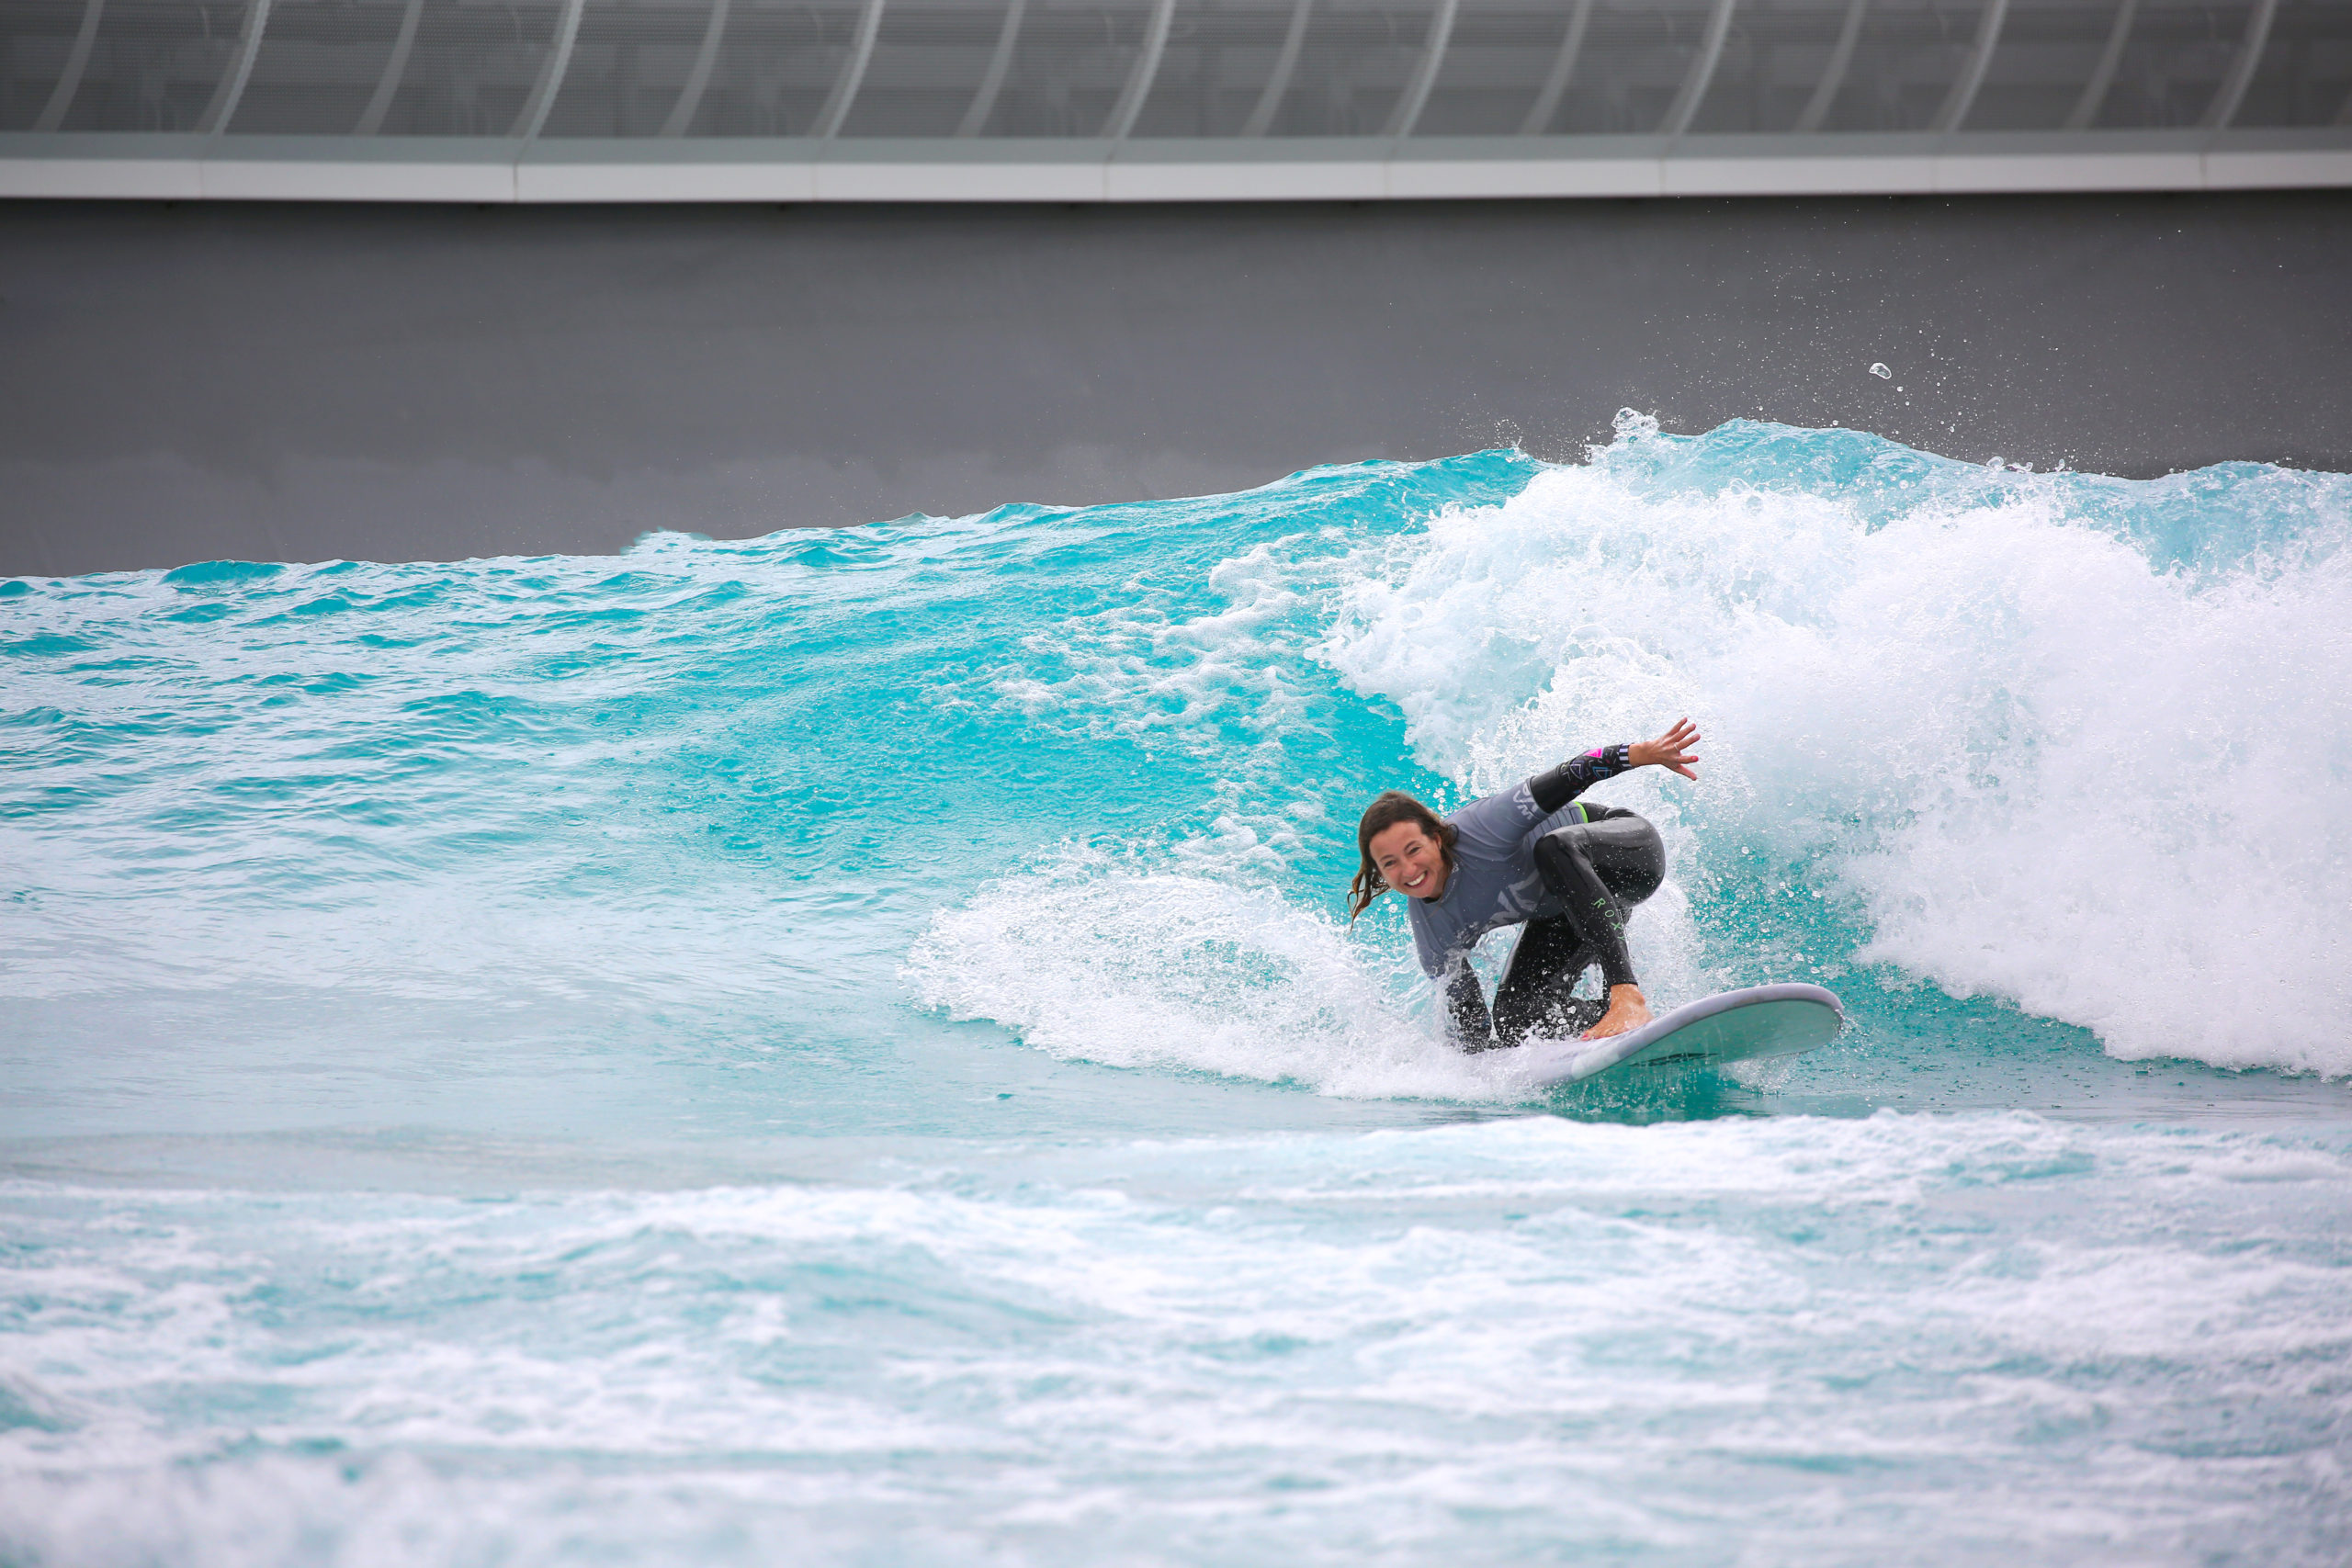 The Wave wavegarden Wave Pool Surf Parkin Bristol - The Wave surfing review by Euphoric Threads